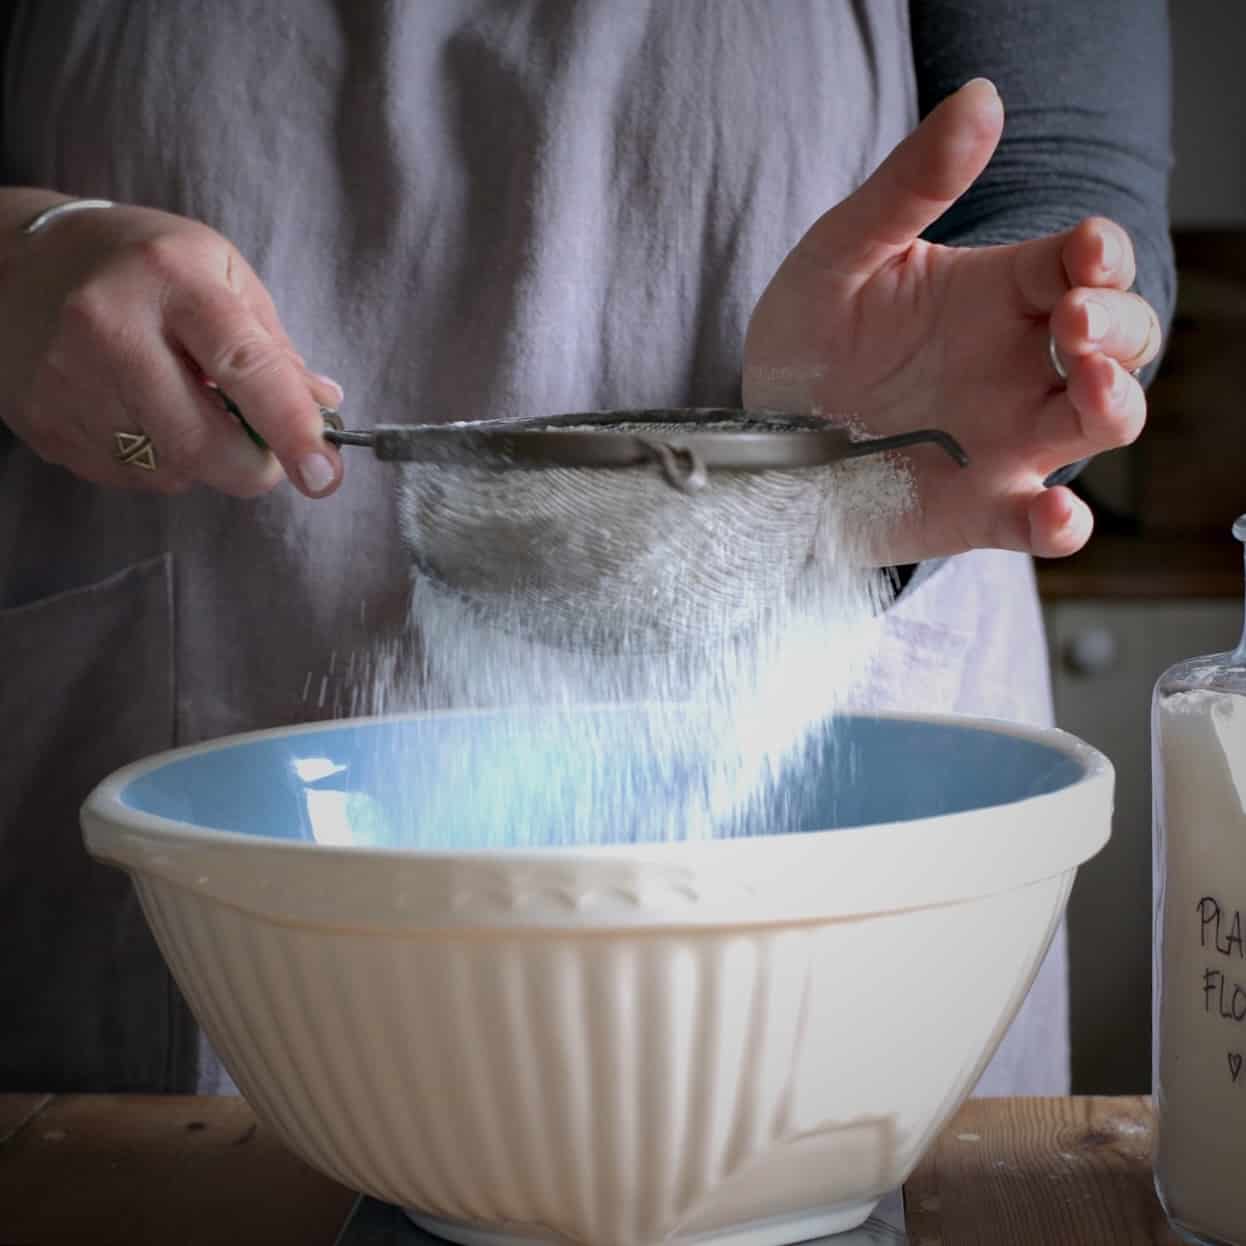 Woman sieving flour in an old fashioned sieve over a blue and white mixing bowl